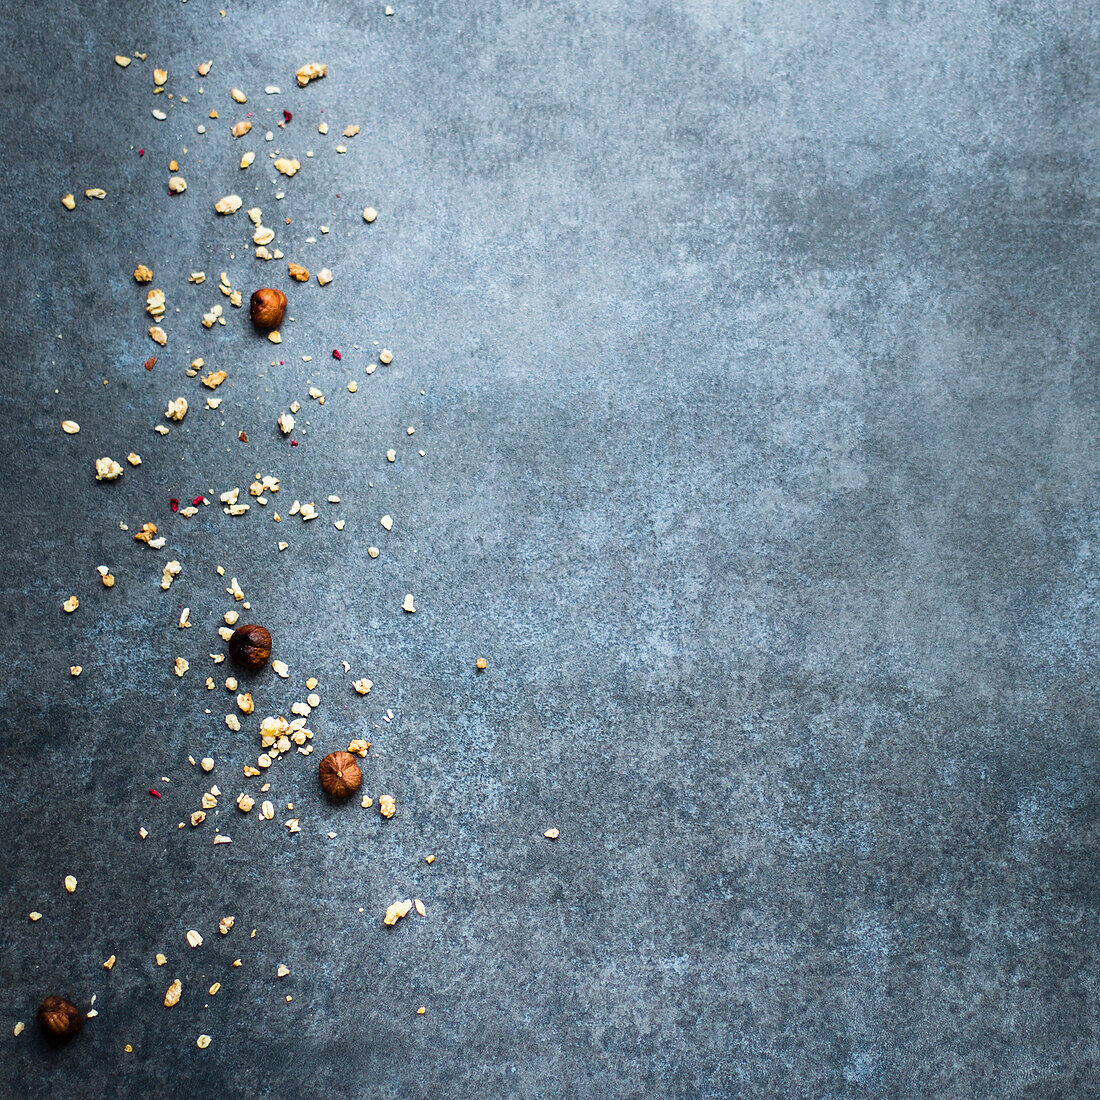 Hazelnuts and crumbs on a blue-grey background